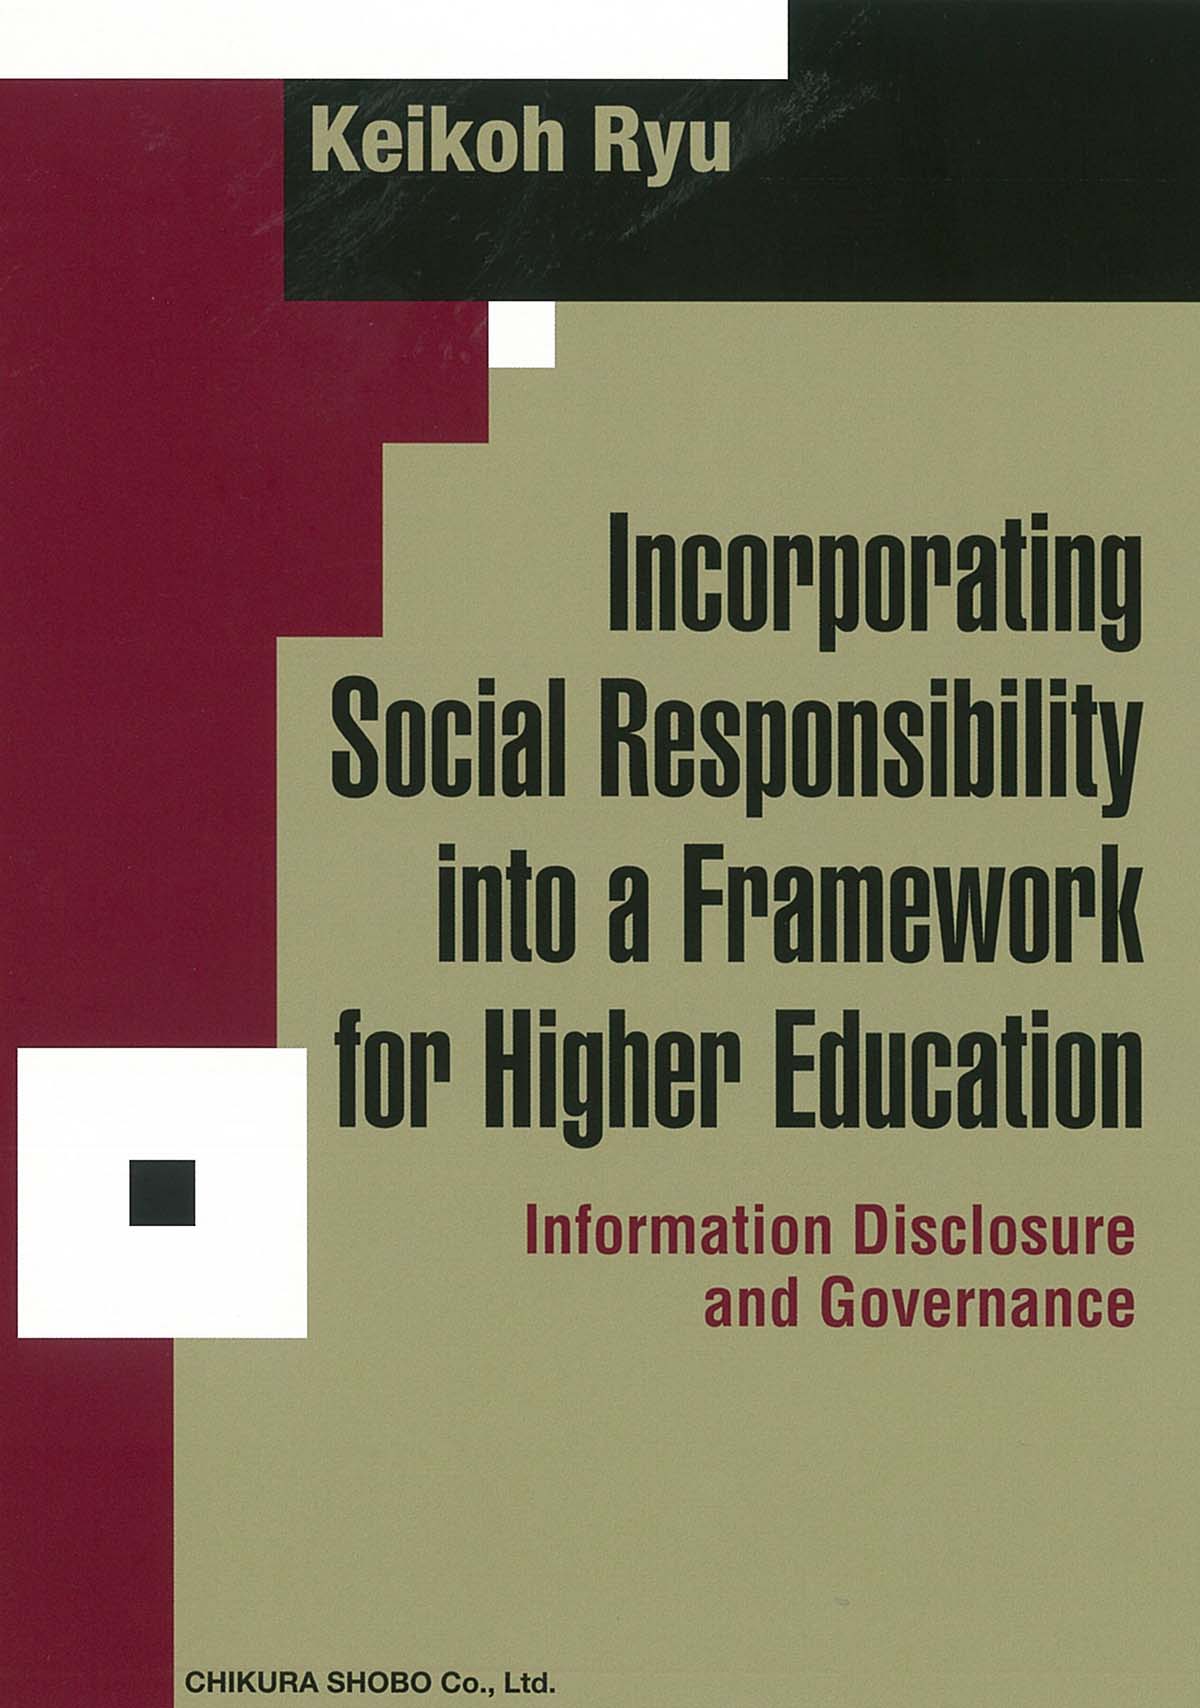 Incorporating Social Responsibility into a Framework for Higher Educationの商品画像